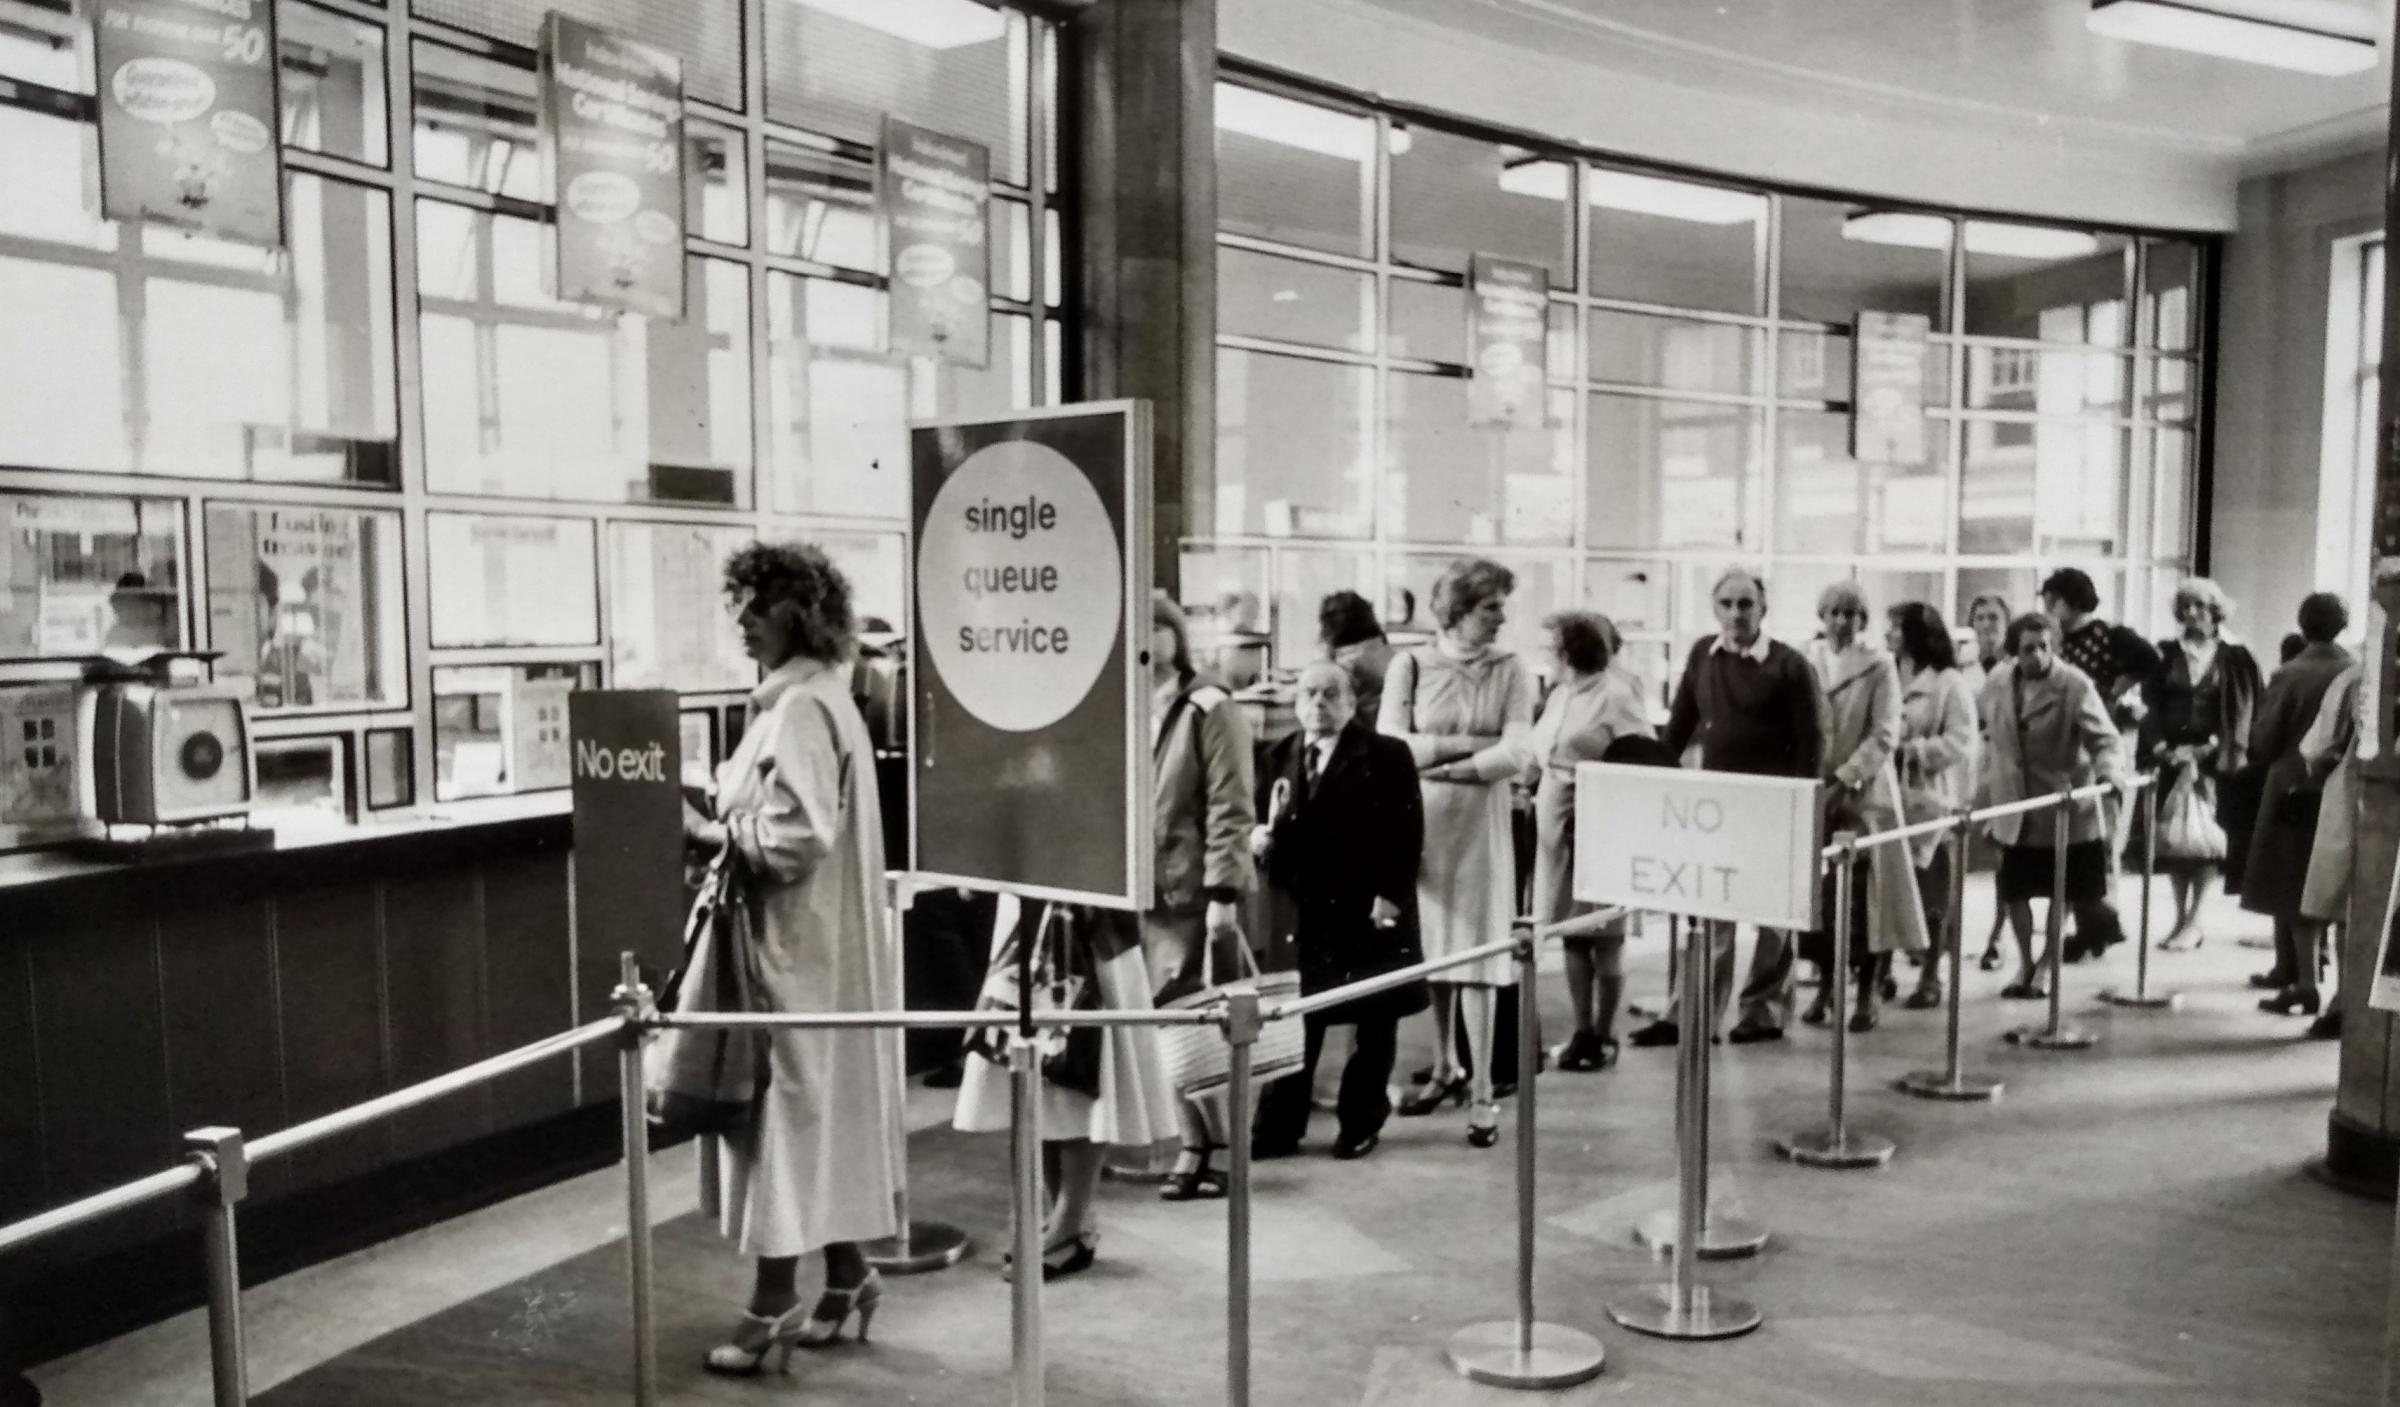 June 1981 and the special queuing system in operation at Worcester’s central post office. Some things never change...